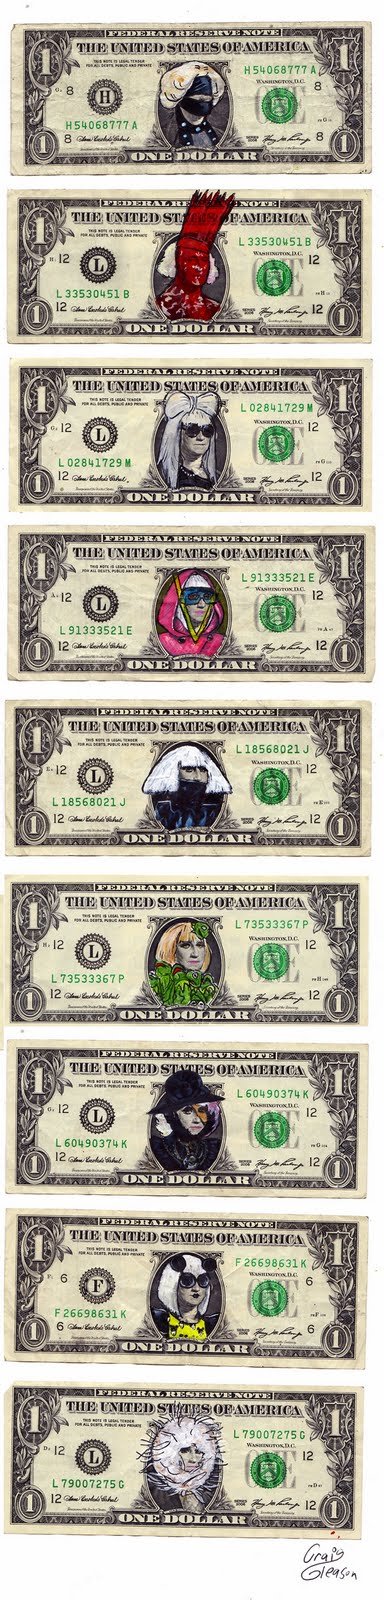 With the way things are going with her,, we could be using this currency soon!!  